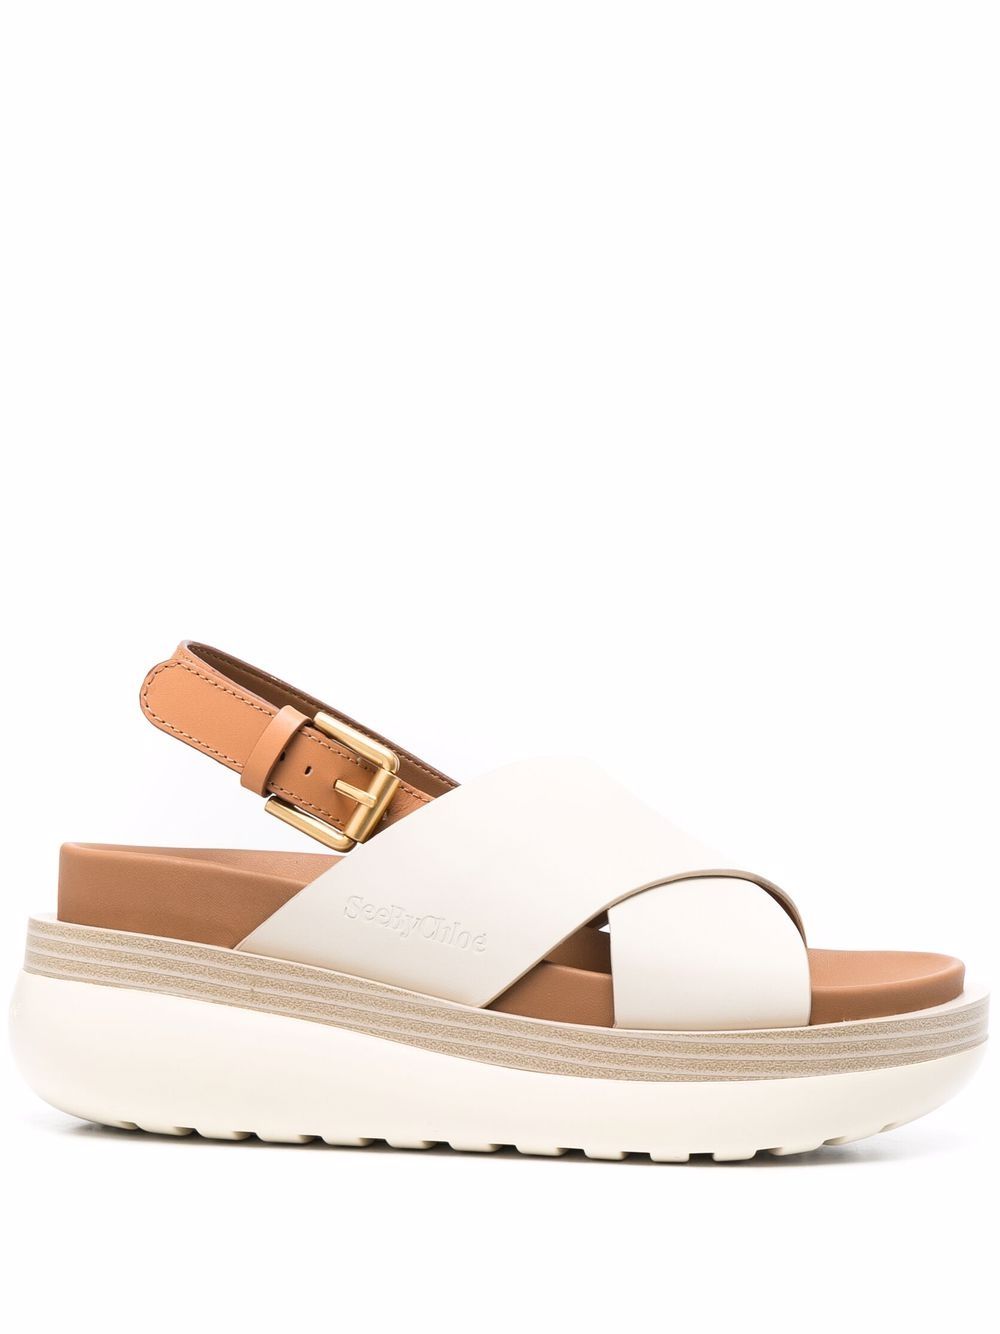 Shop See by Chloé cross-strap slingback sandals with Express Delivery ...